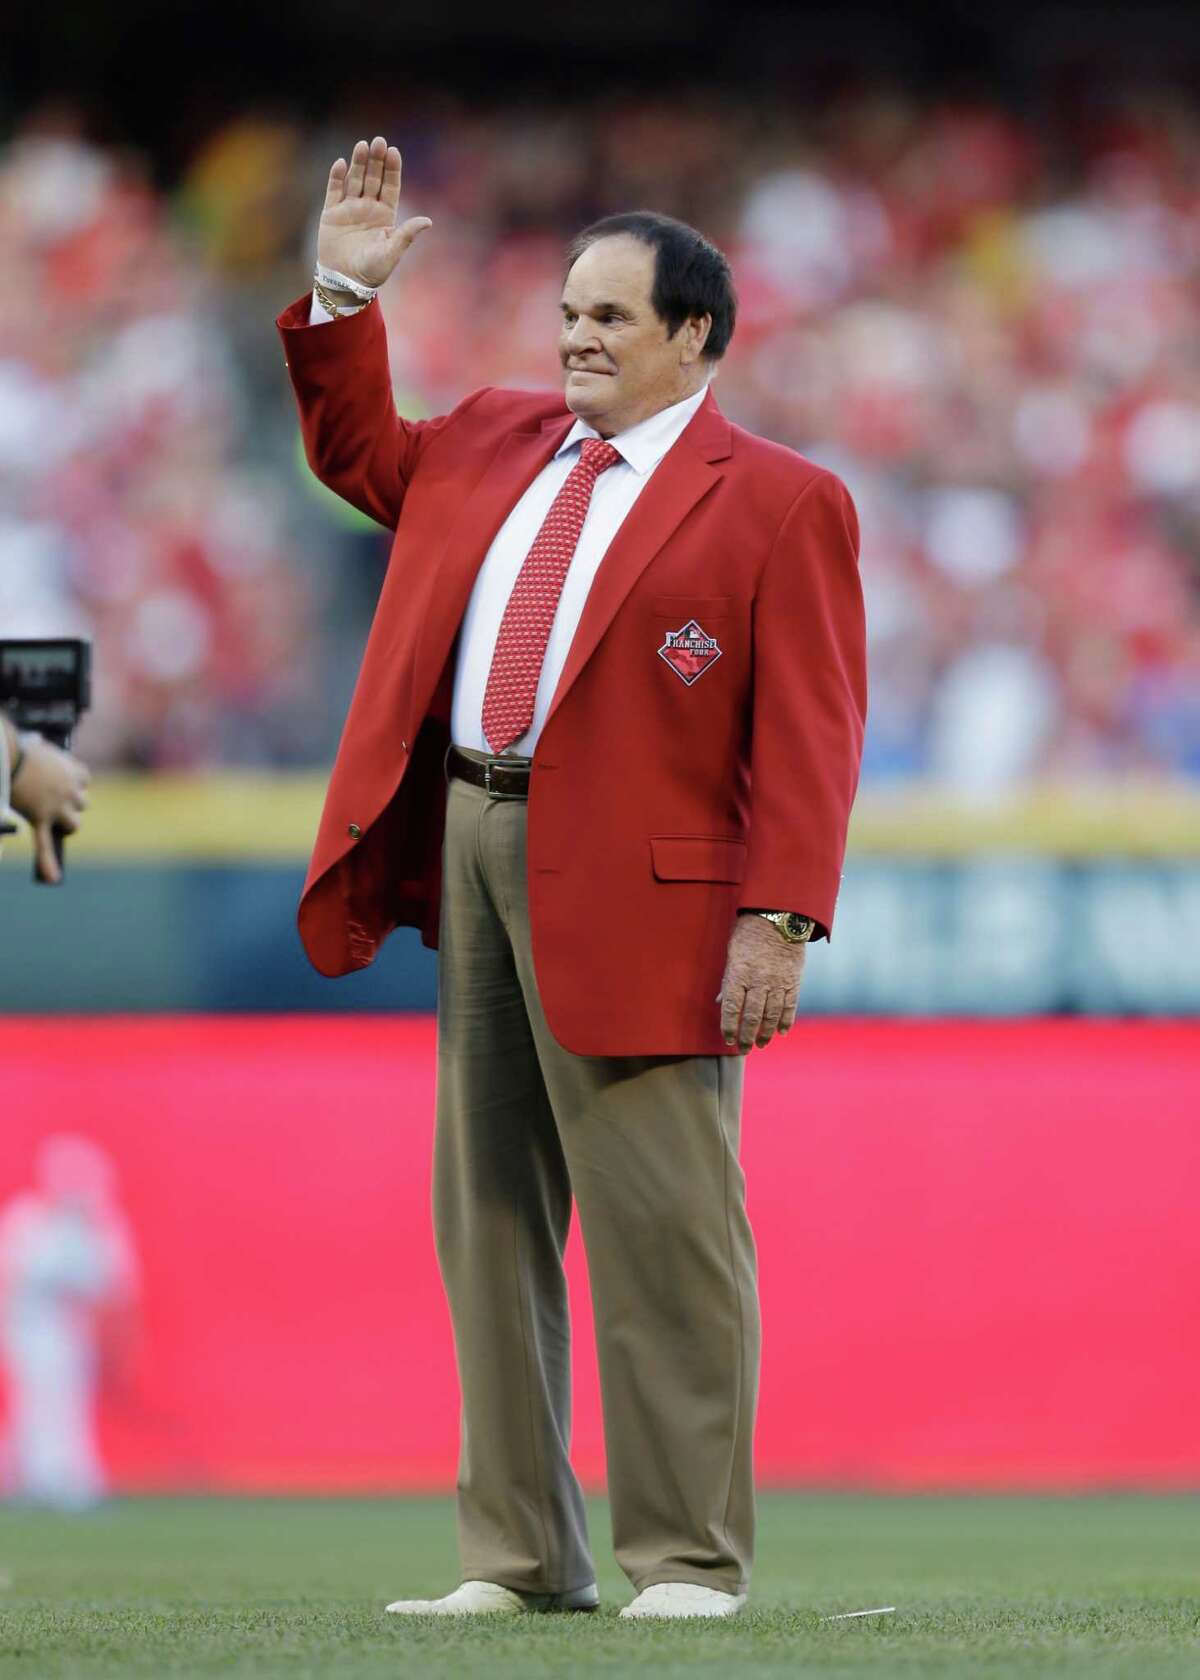 Pete Rose before the MLB All-Star baseball game, Tuesday, July 14, 2015, in Cincinnati. (AP Photo/Jeff Roberson)